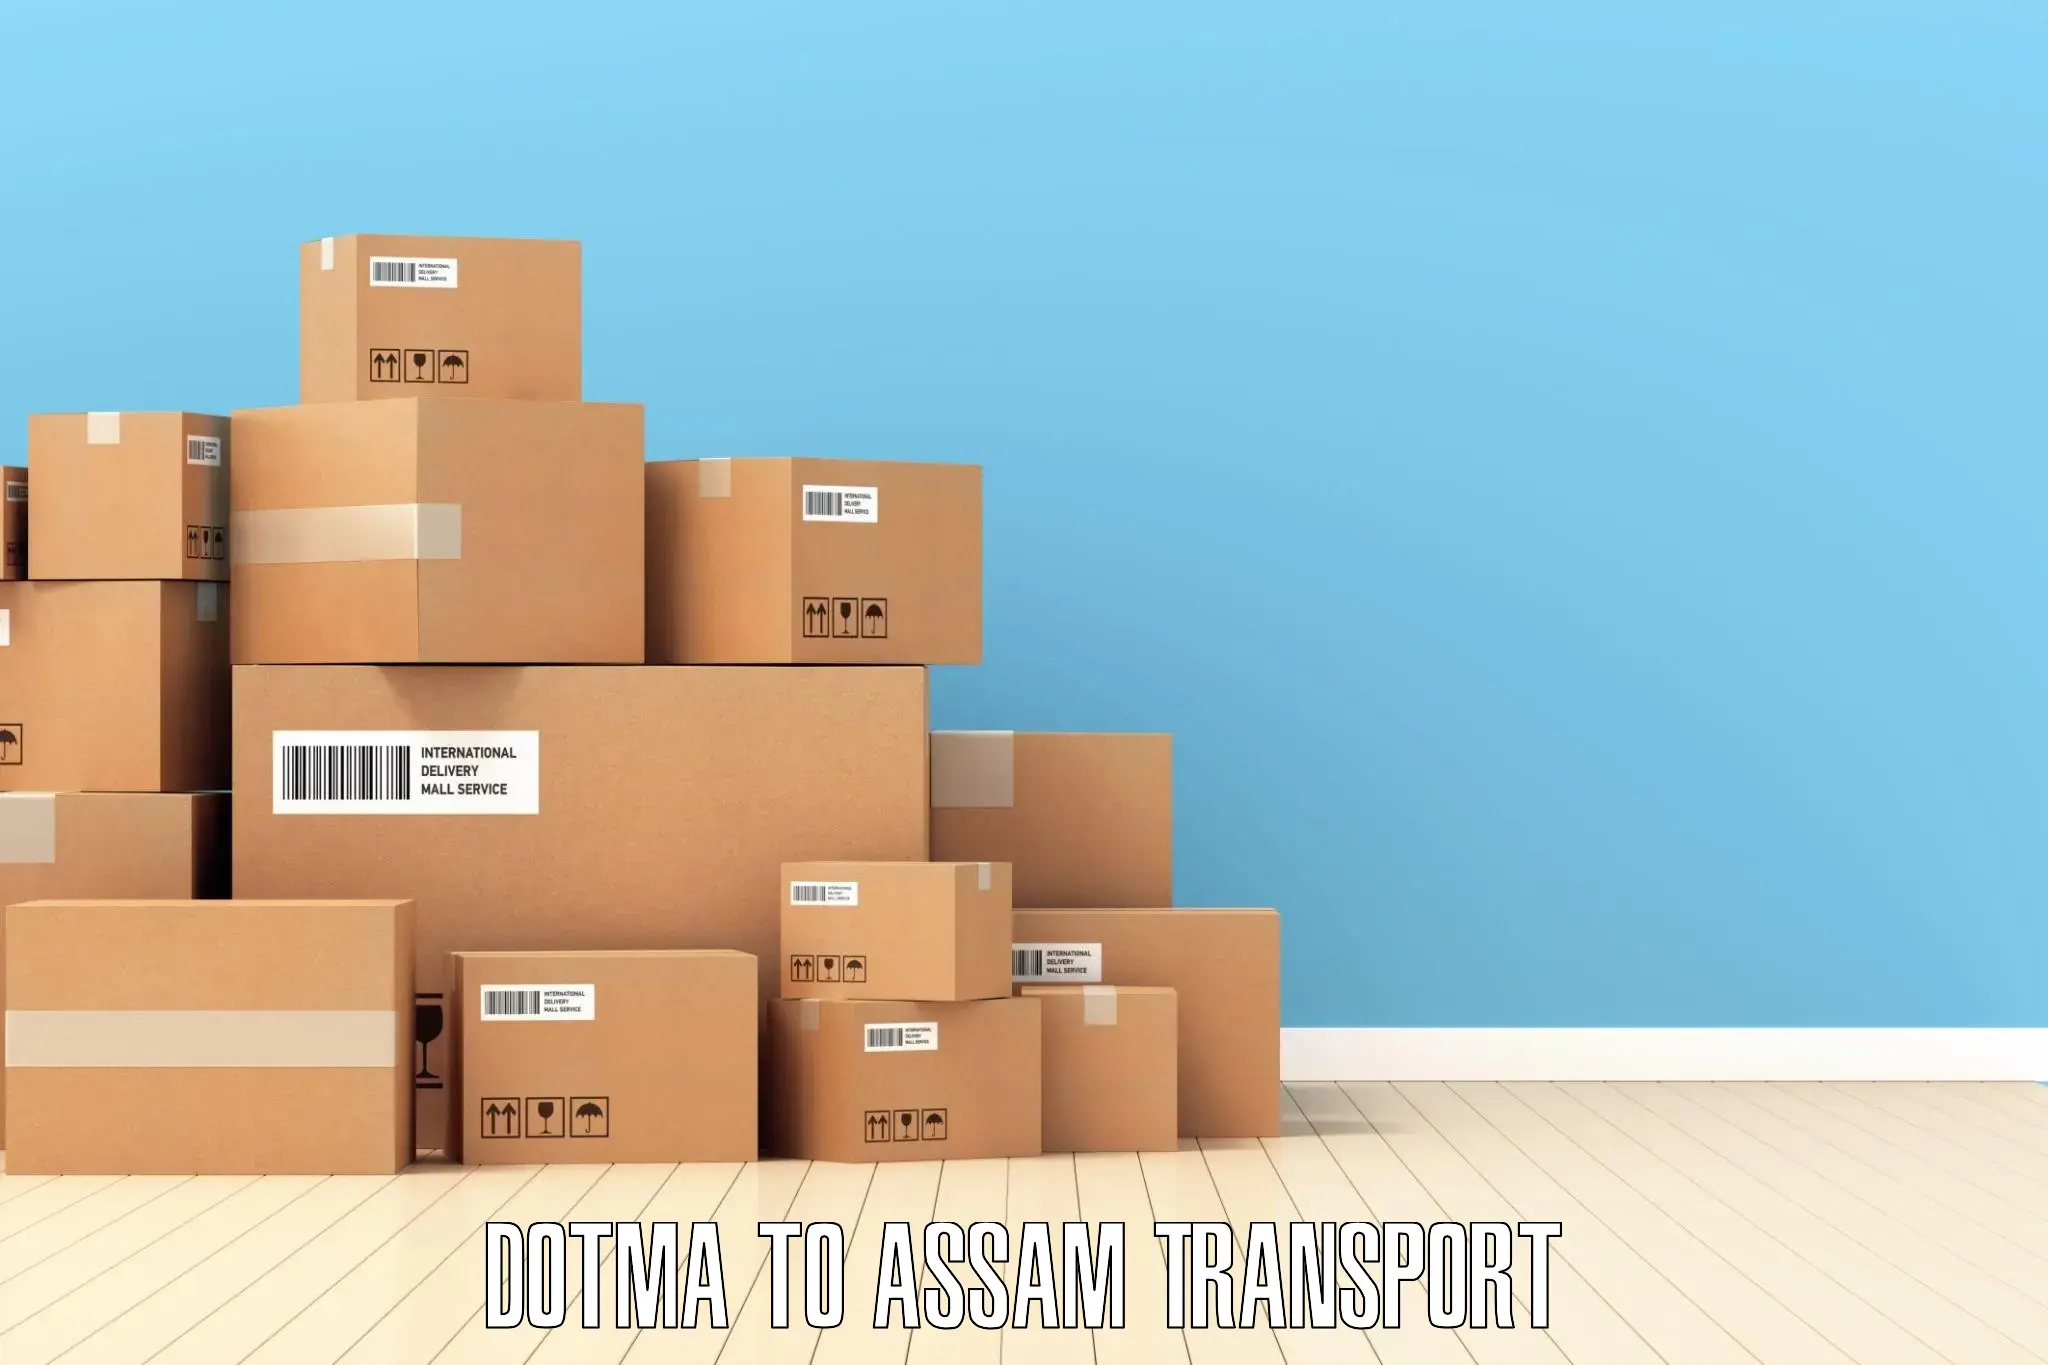 Domestic transport services Dotma to Kampur